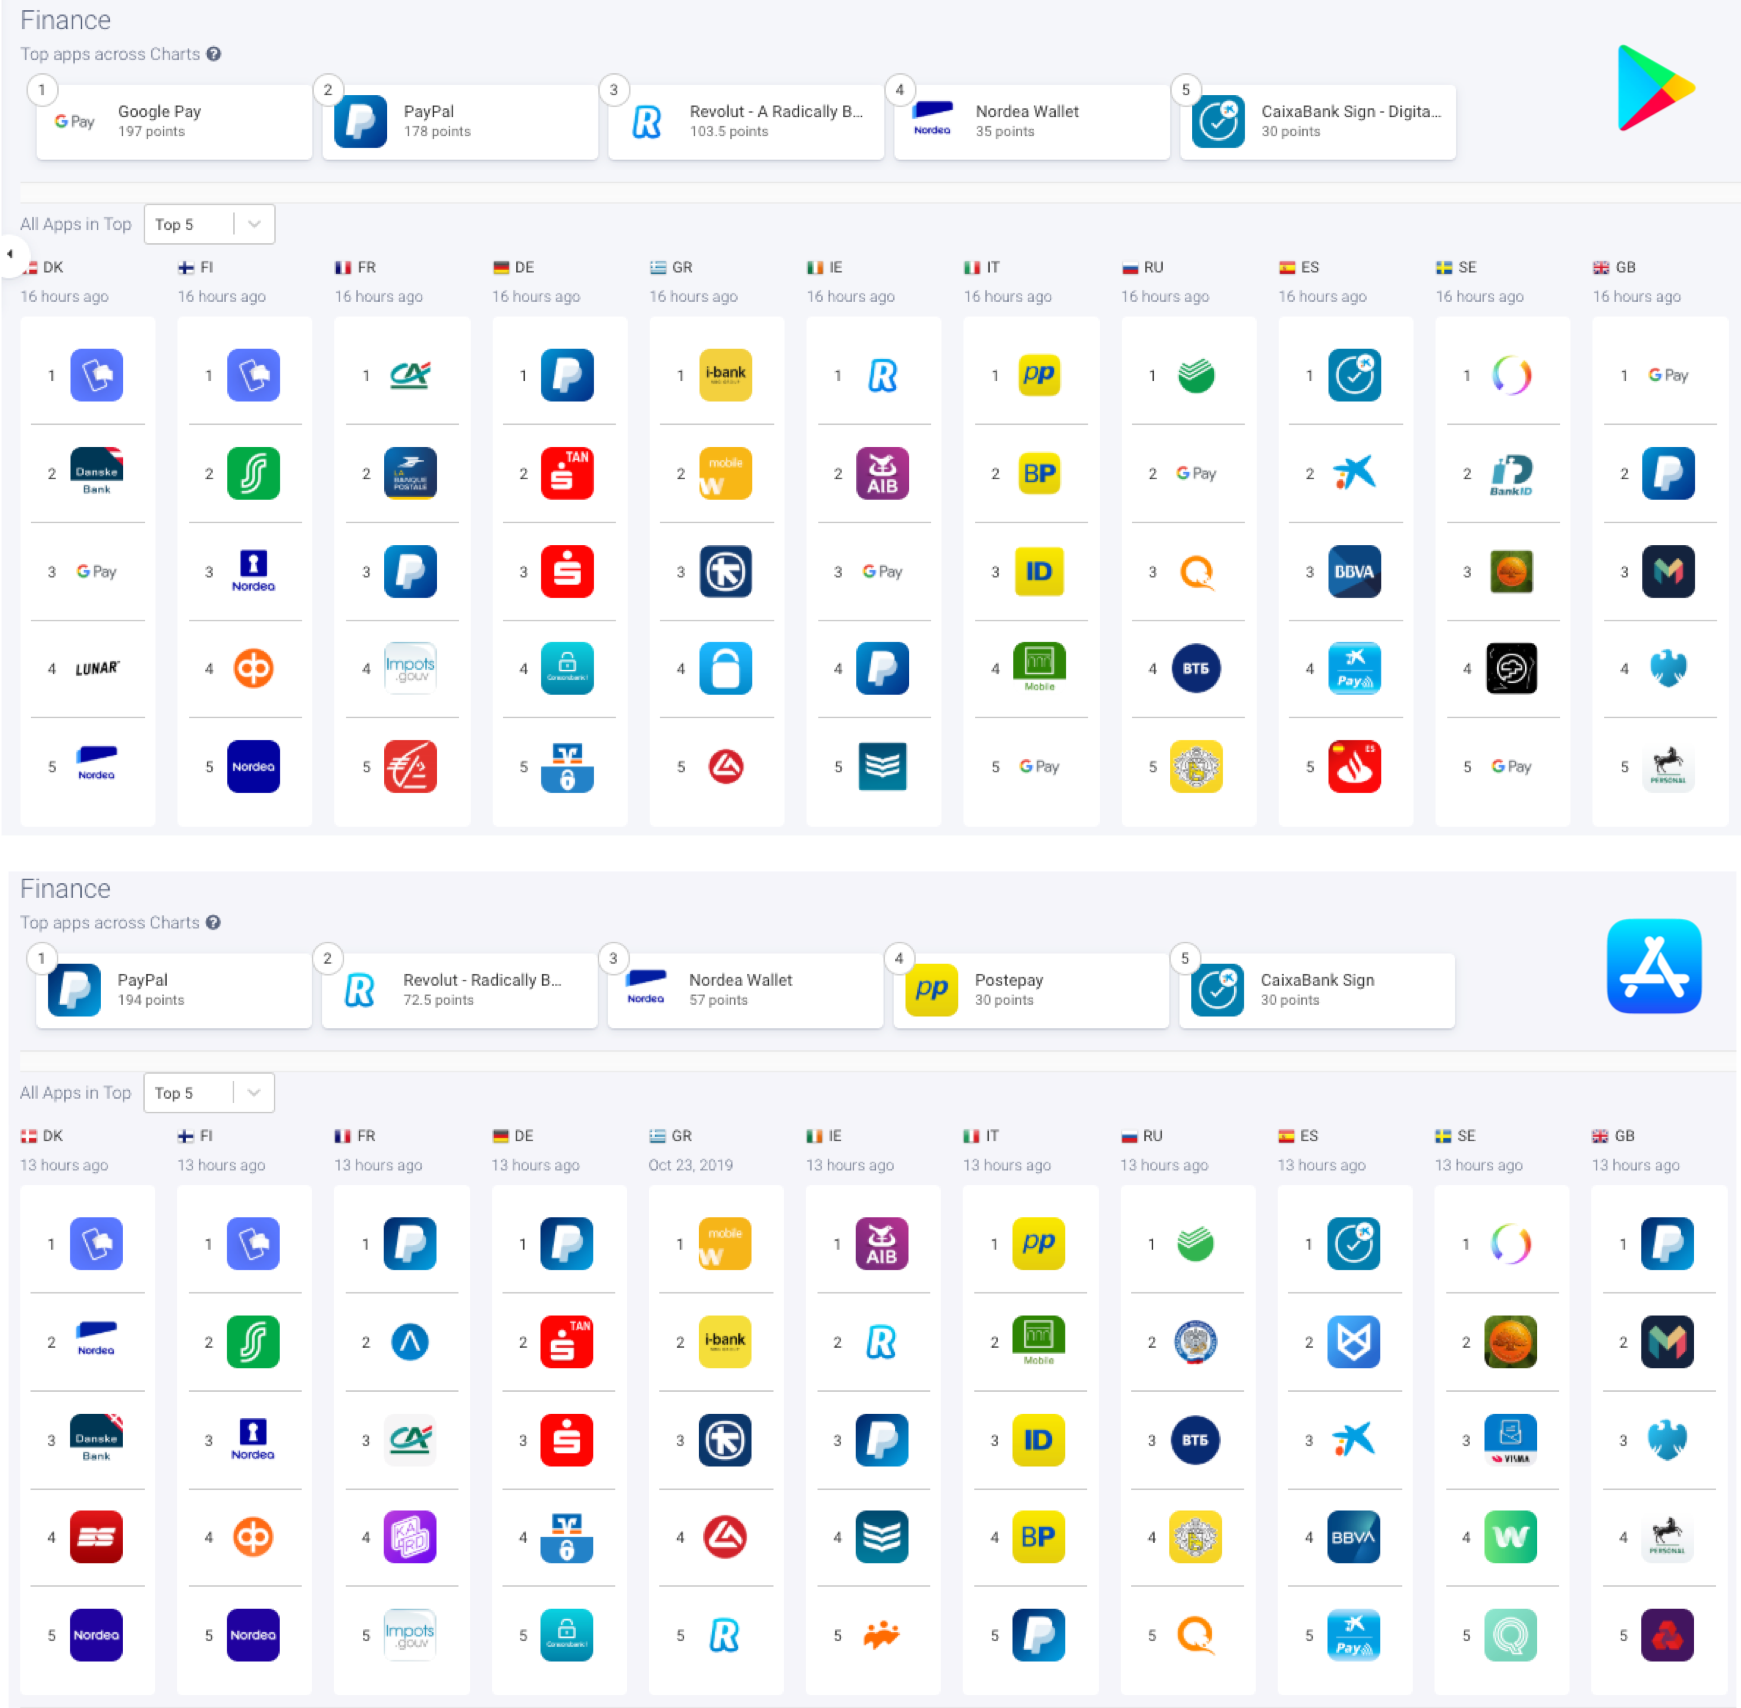 AppTweak Market Intelligence - Comparing the Apple App Store and Google Play Store Top Charts of the Finance Category in EU countries